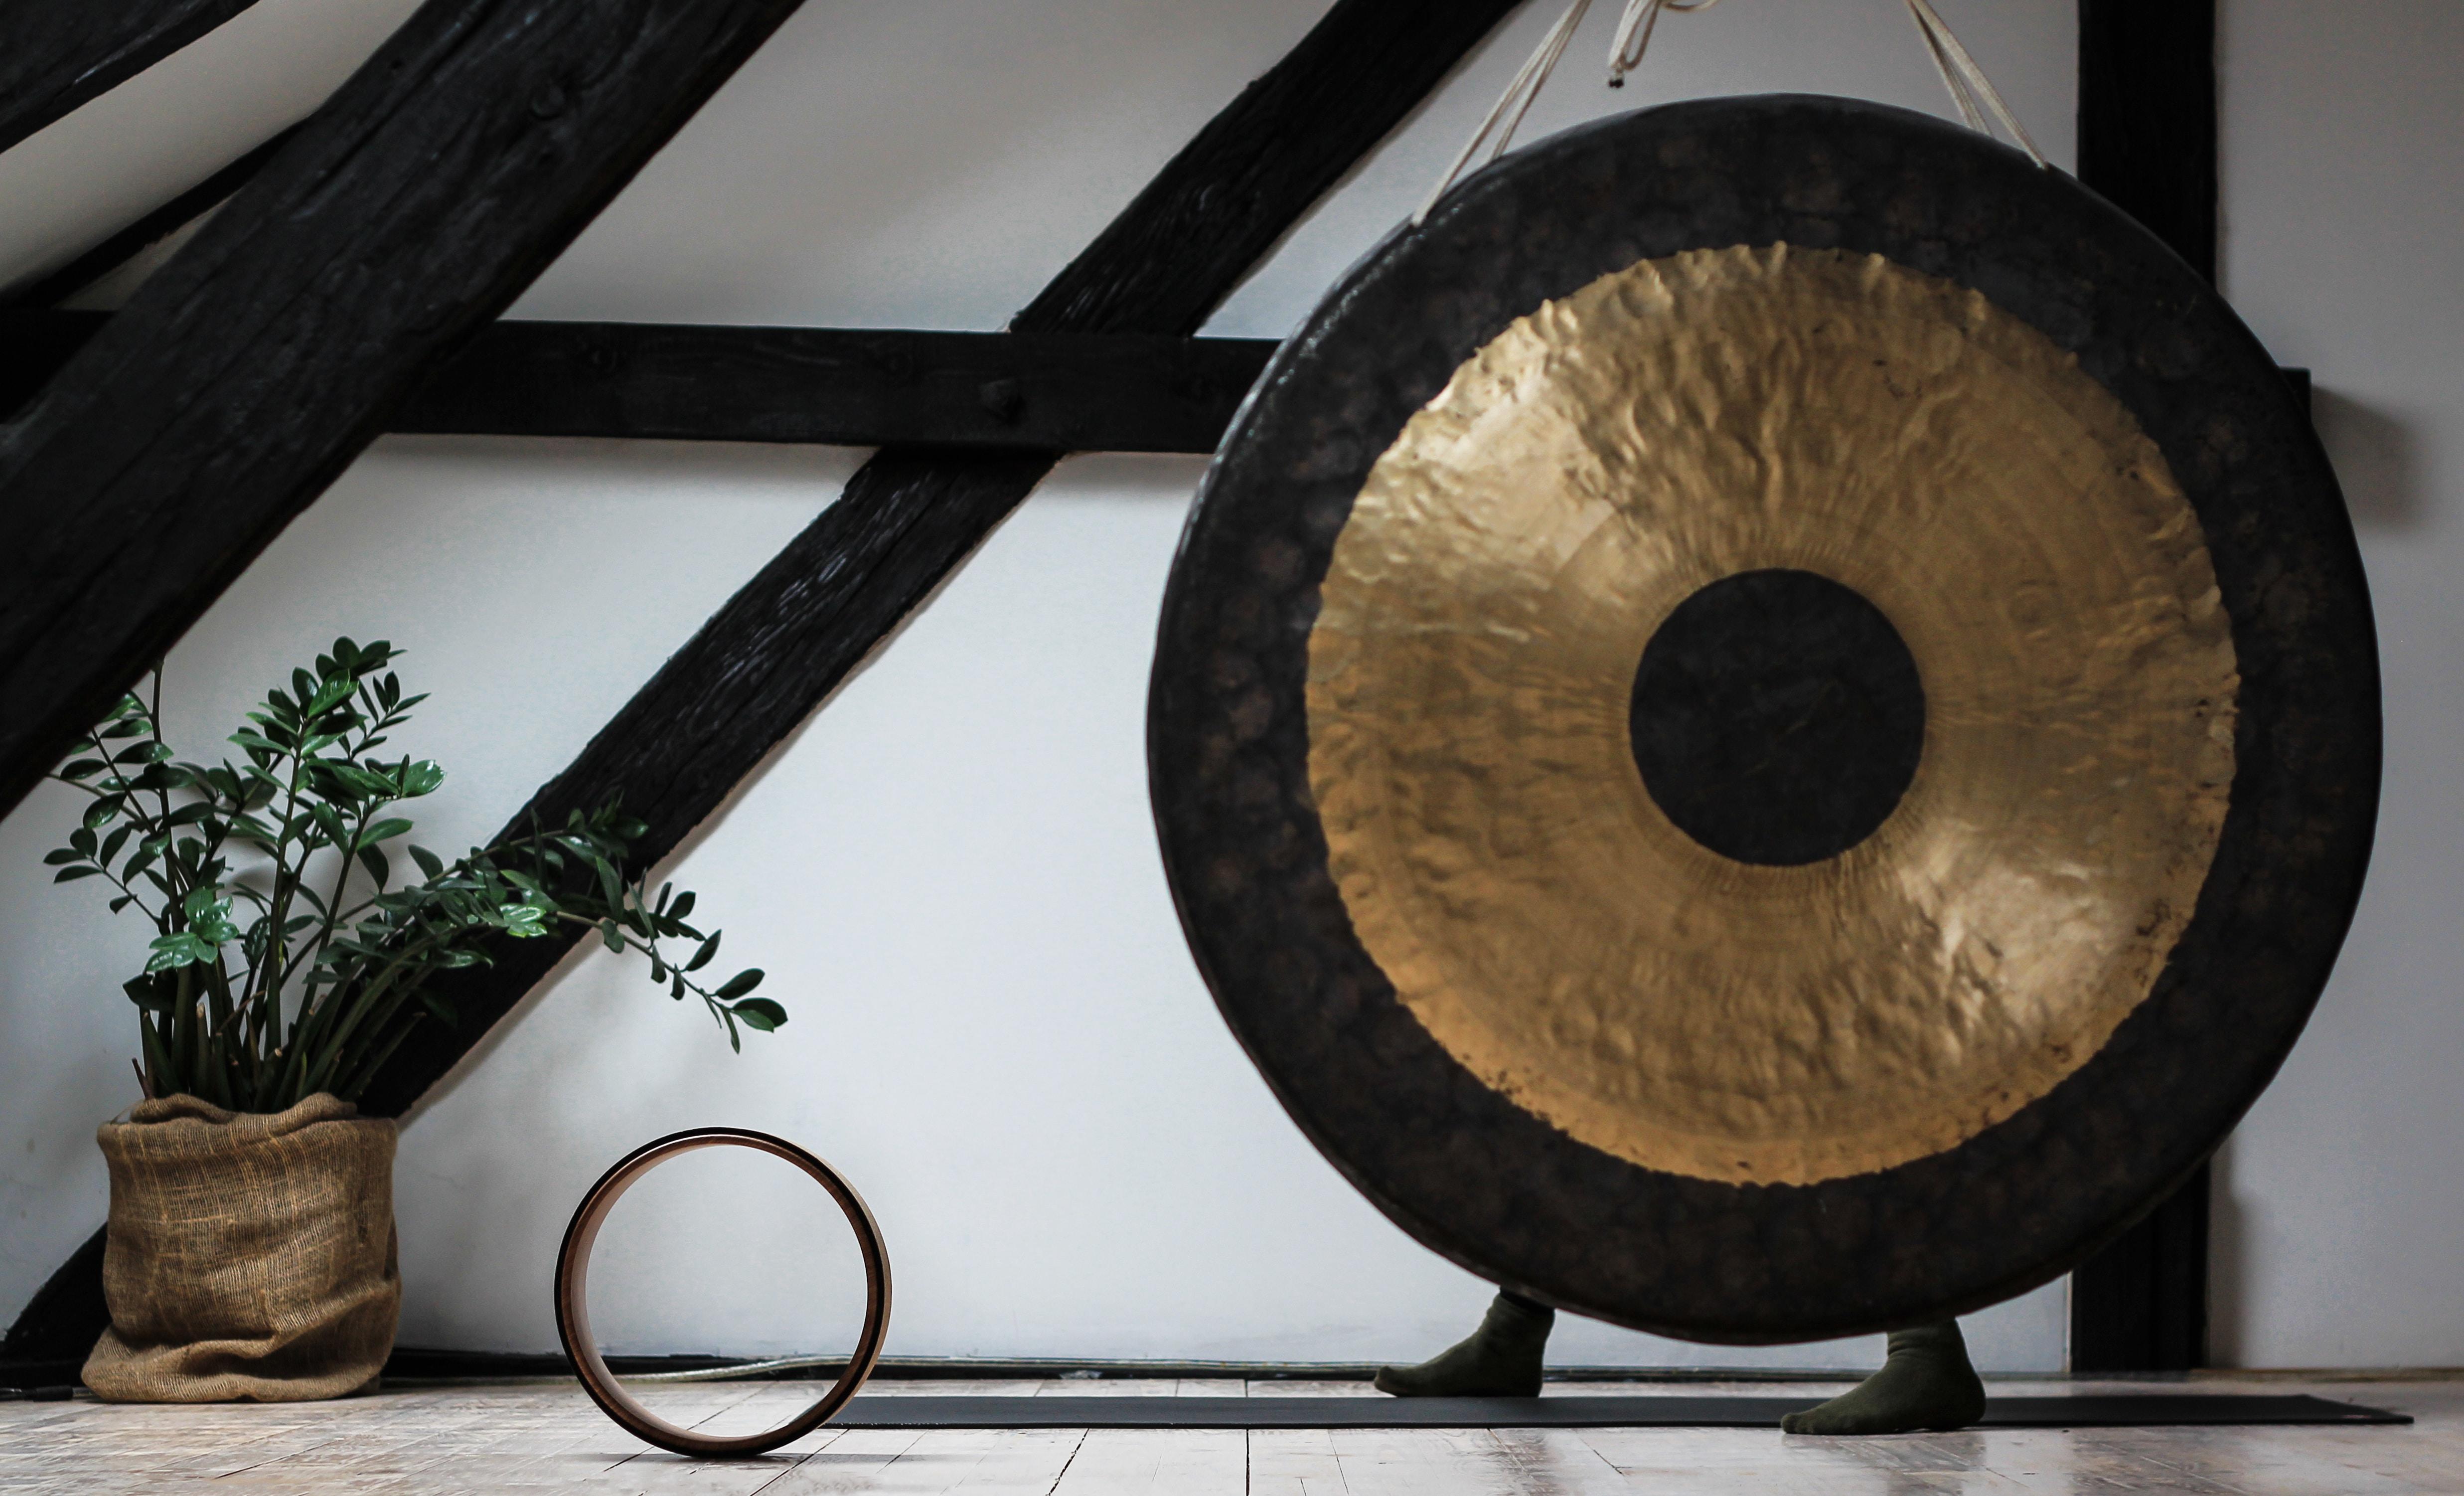 The Nucleus of Sound: An Extended Gong Bath